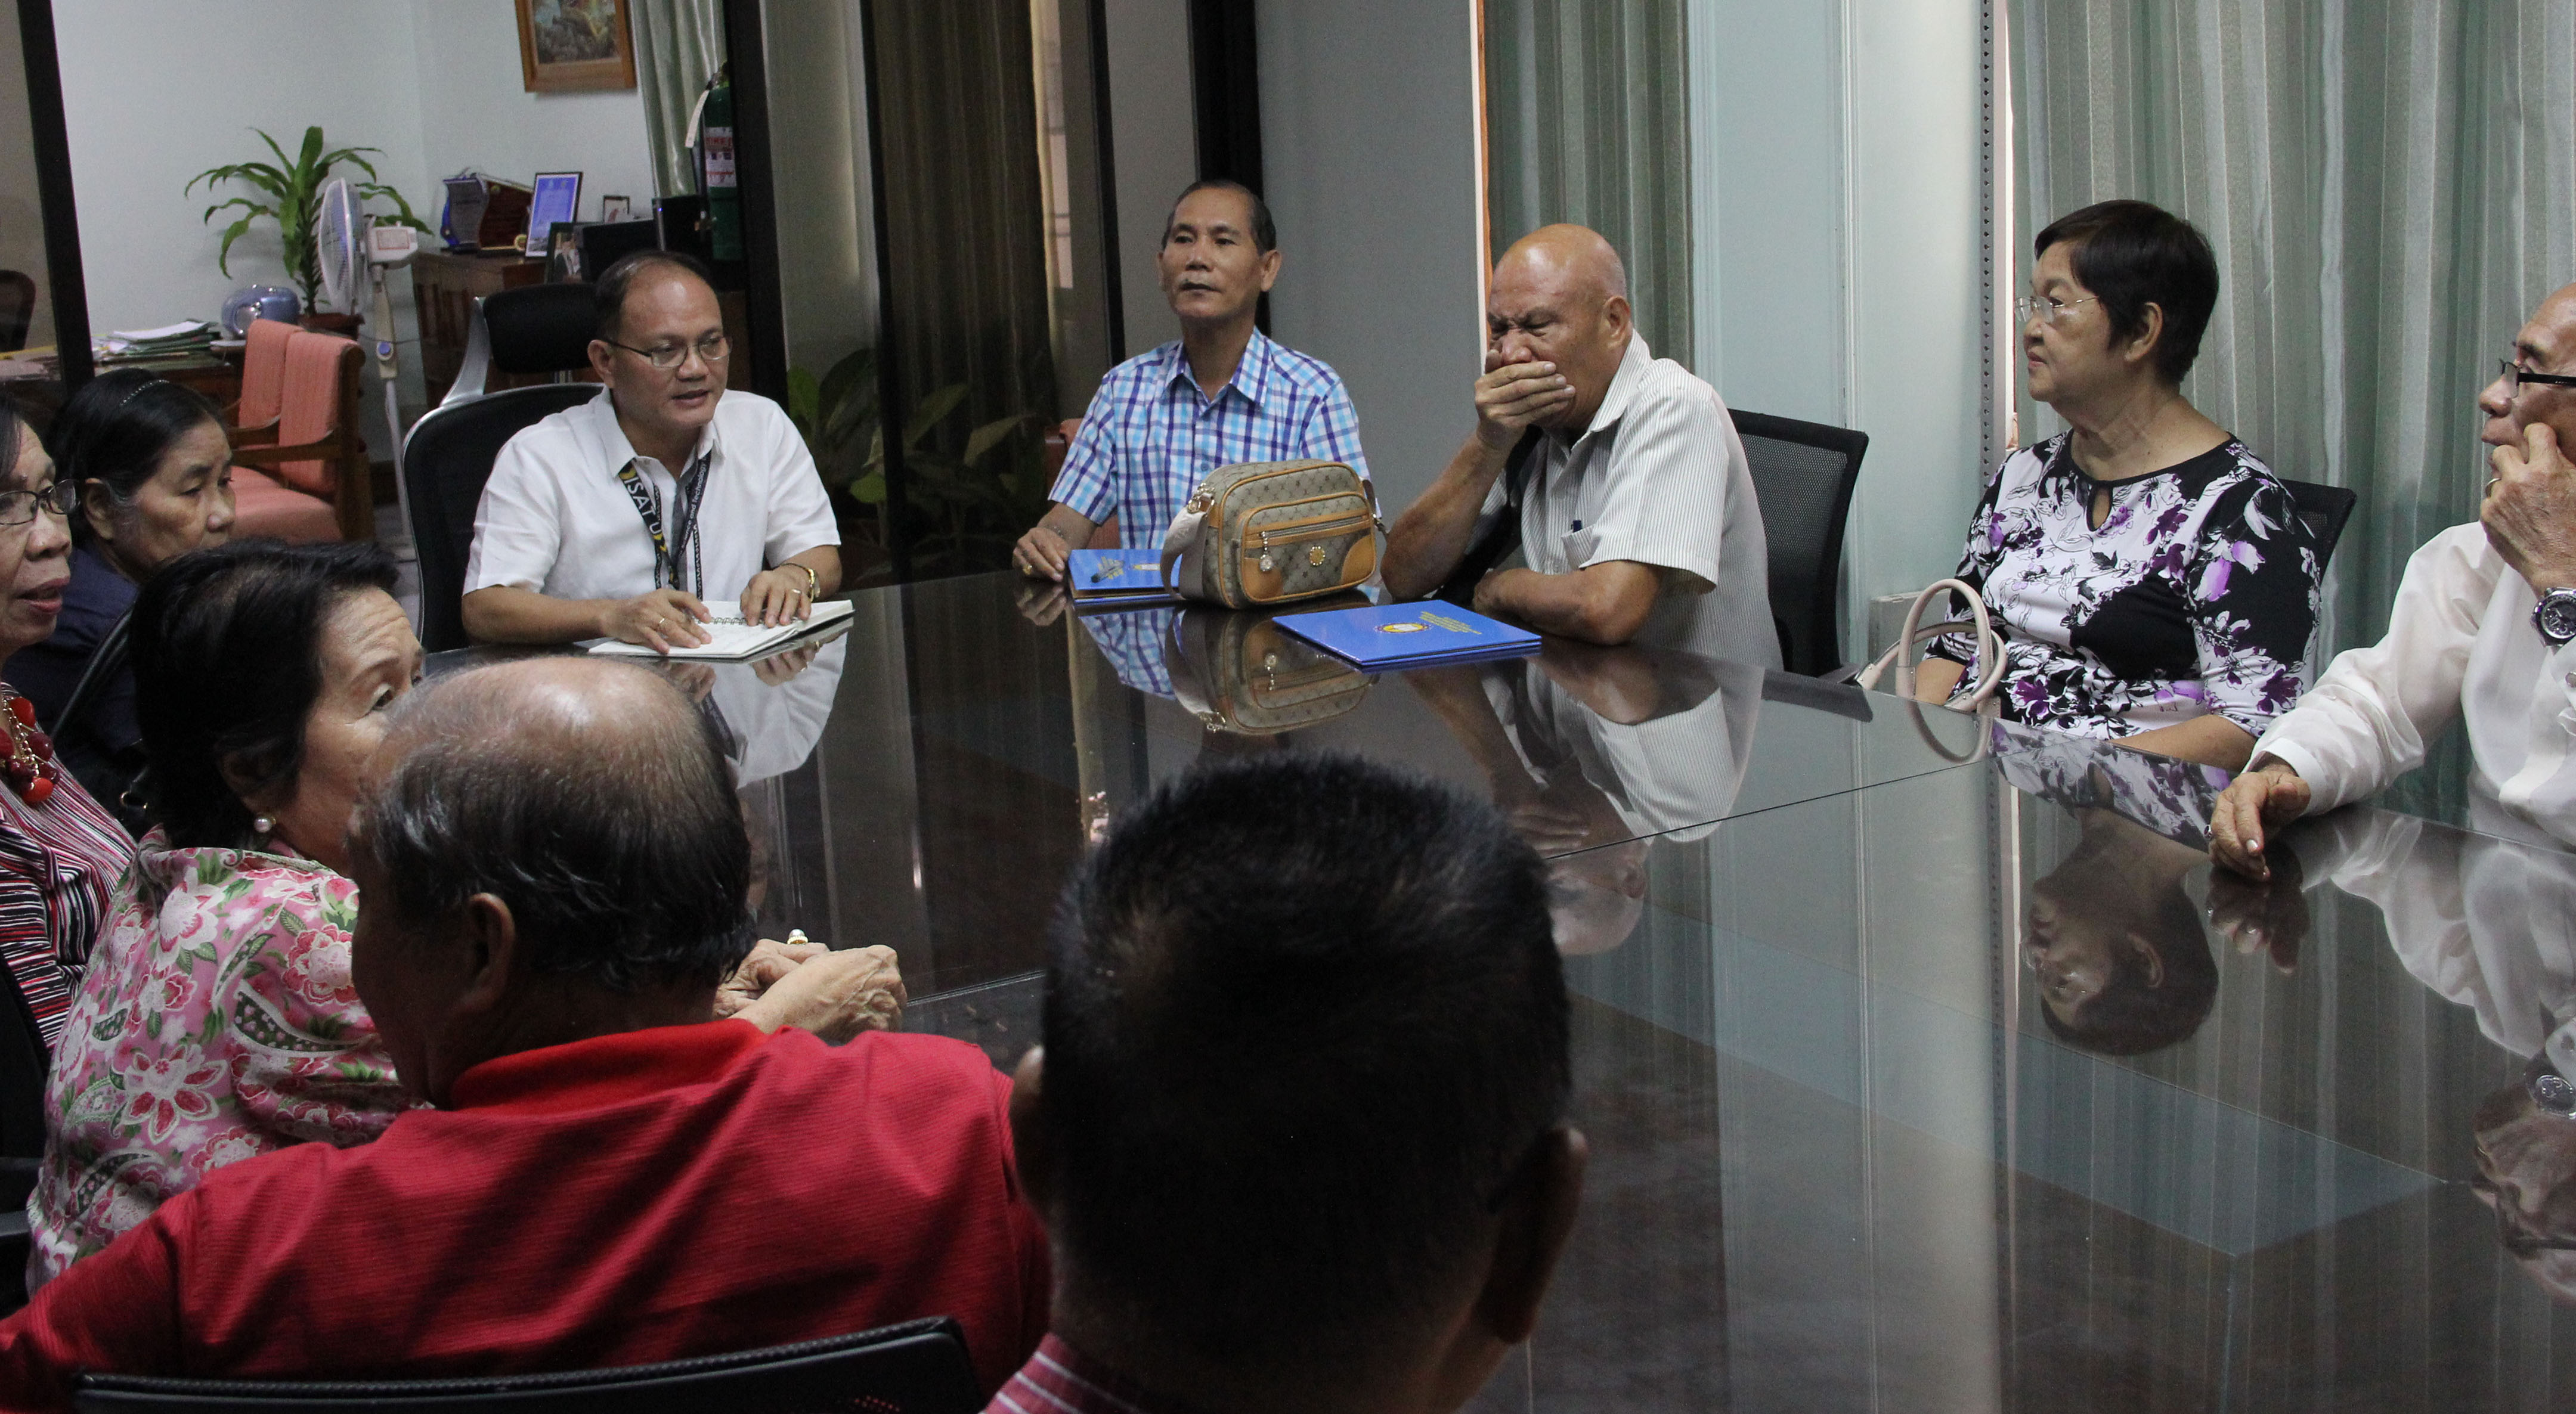 The retirees pay a visit at the Office of the University President